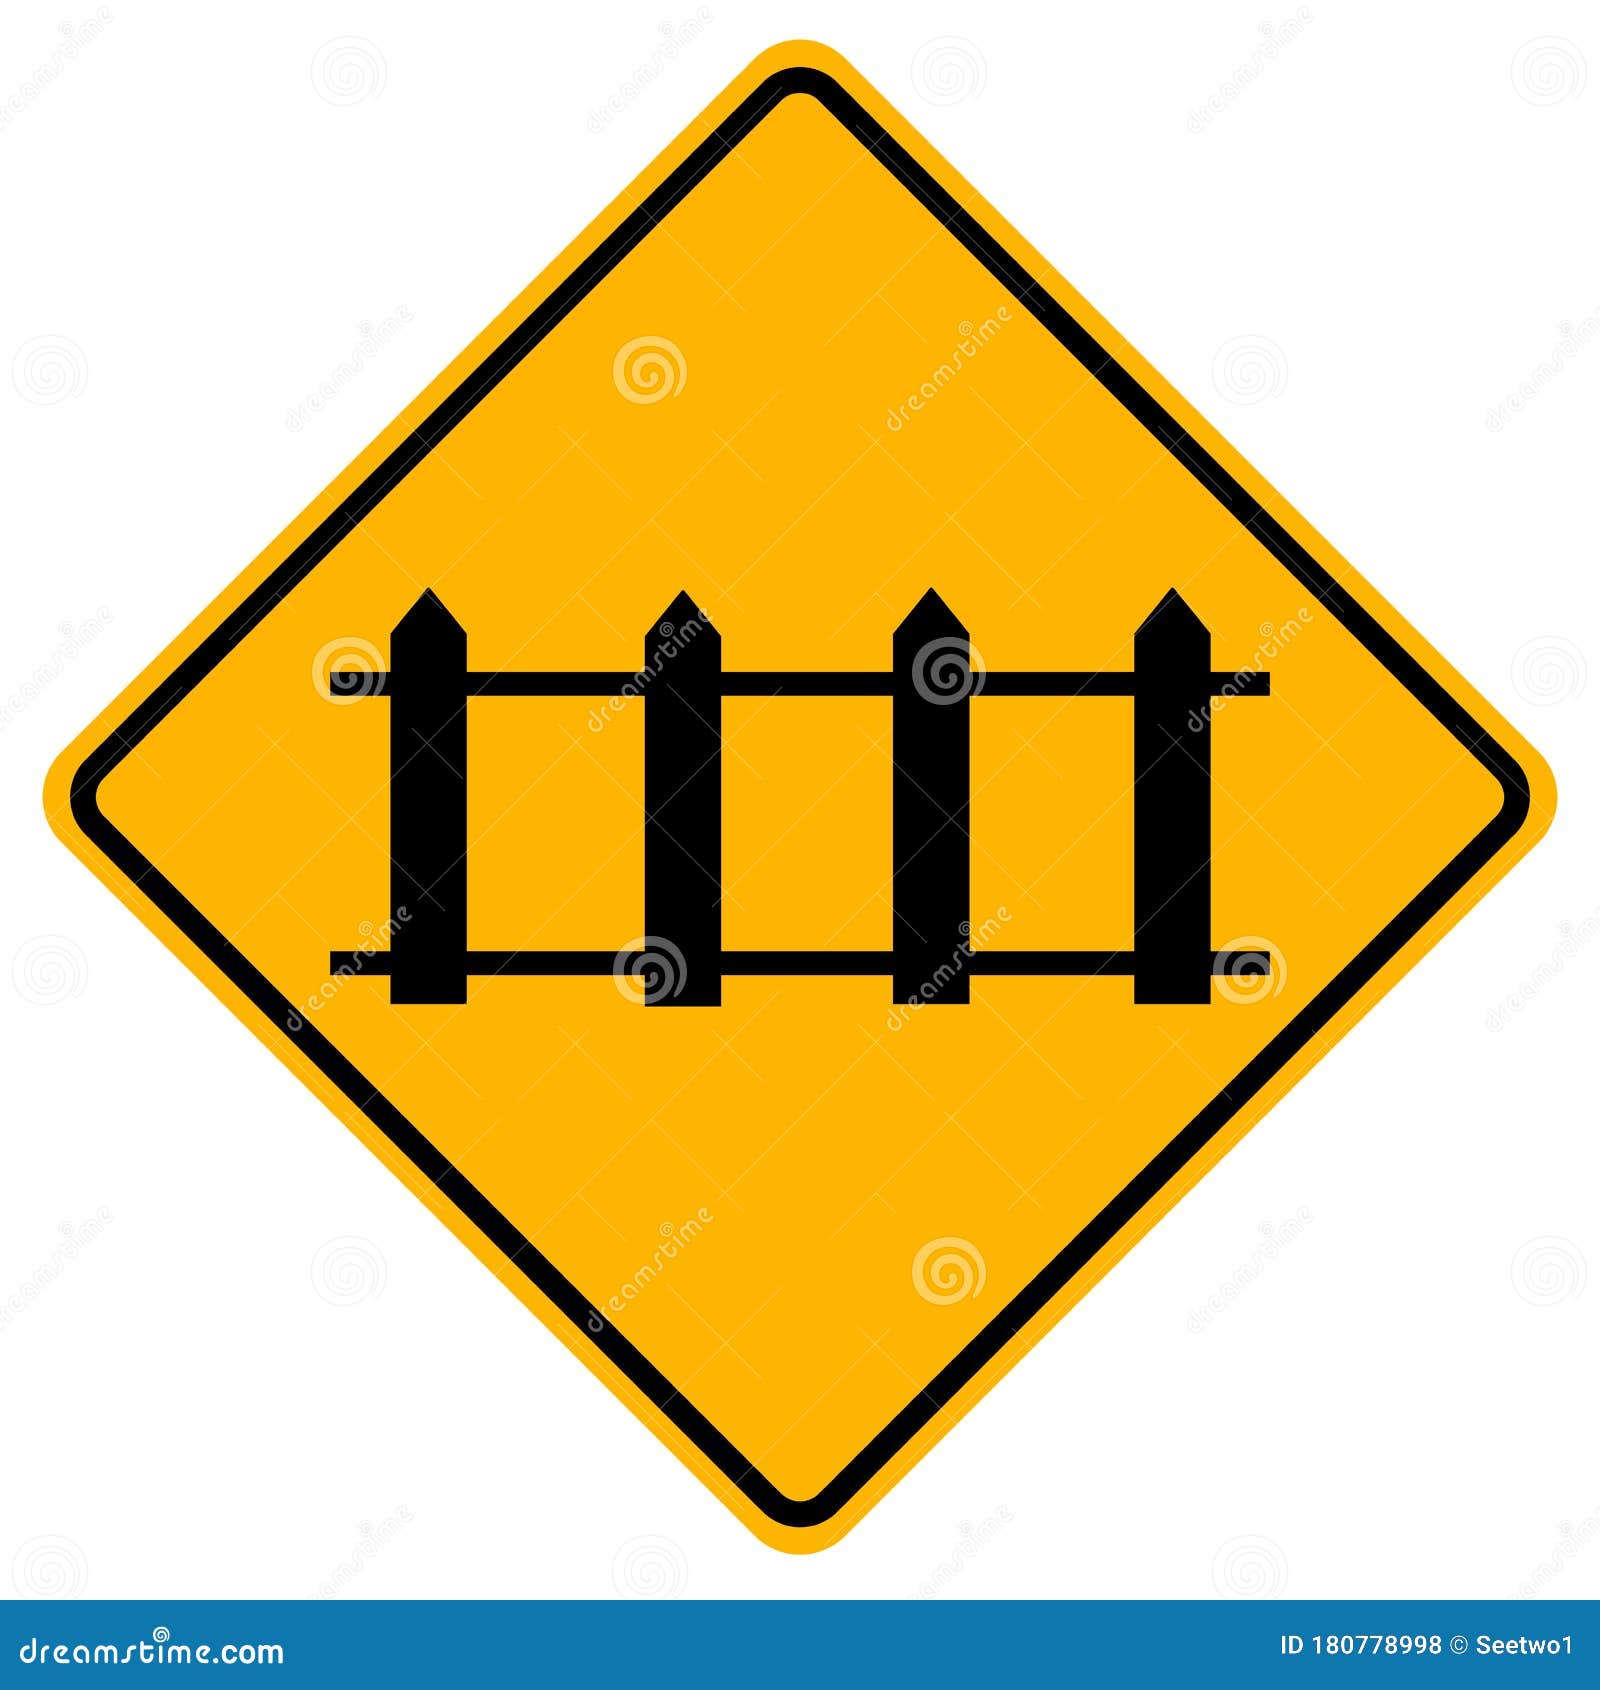 Railroad Crossing Signs Stock Illustrations 210 Railroad Crossing Signs Stock Illustrations Vectors Clipart Dreamstime